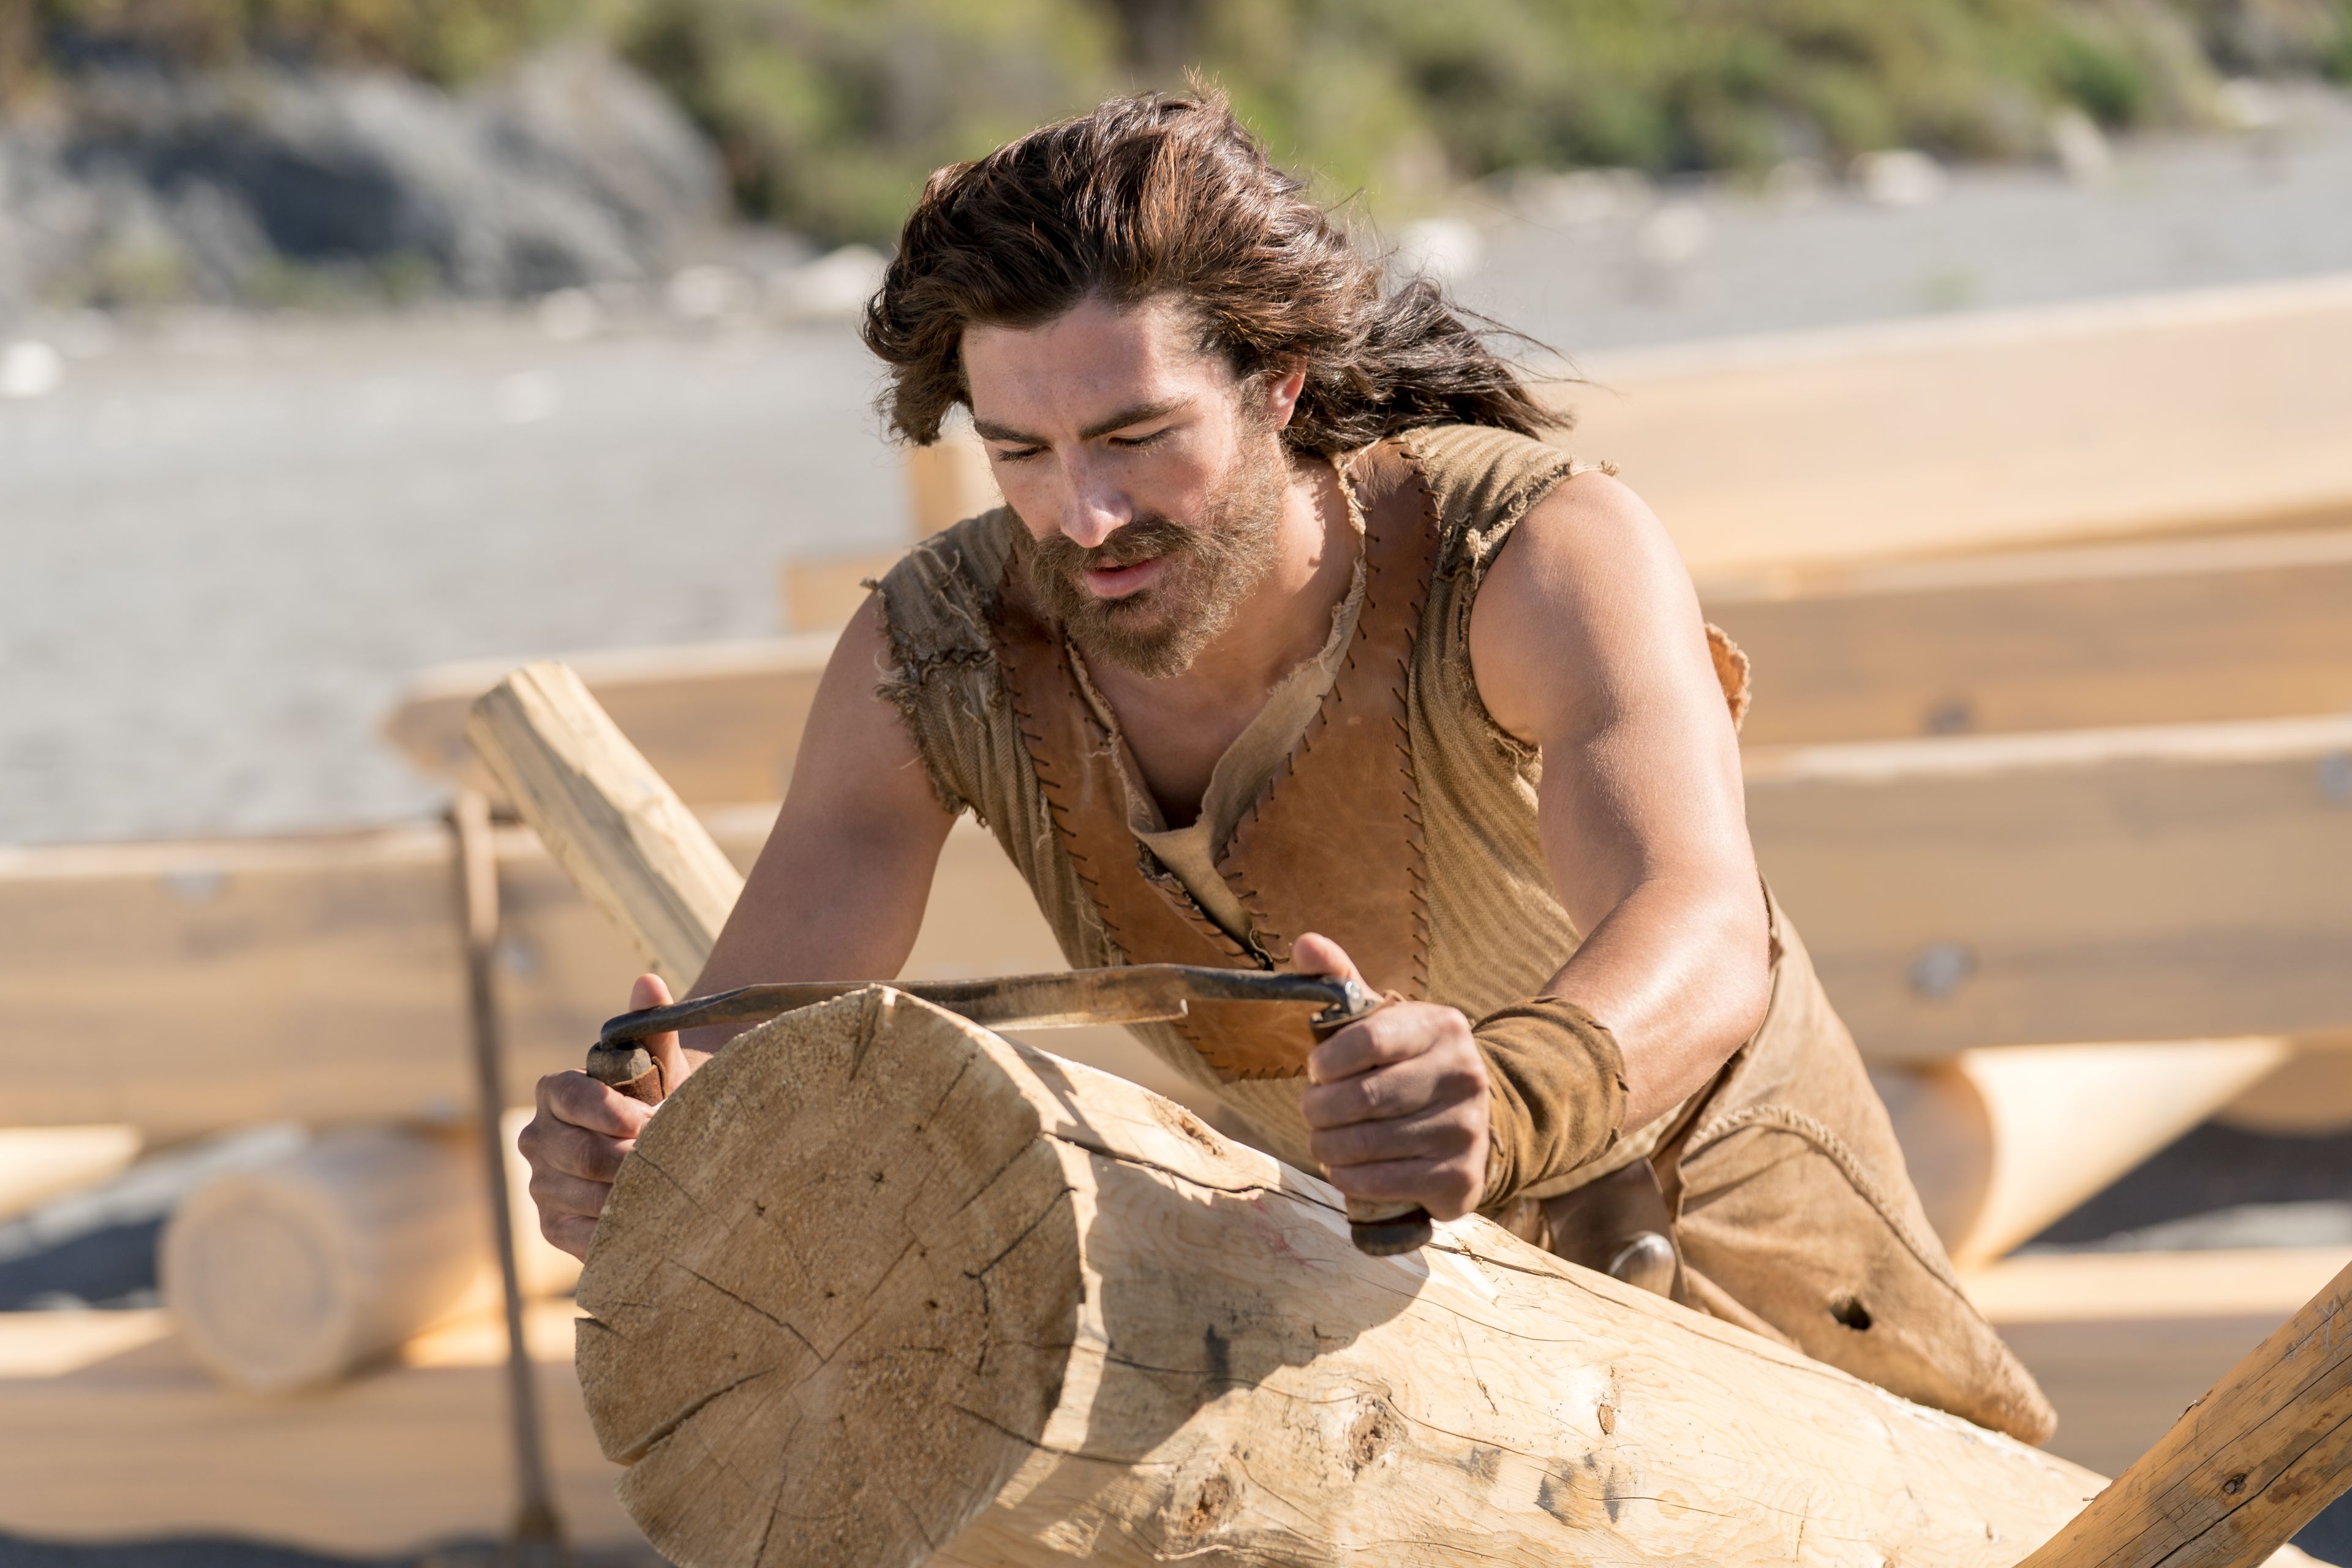 Nephi works on building the ship.